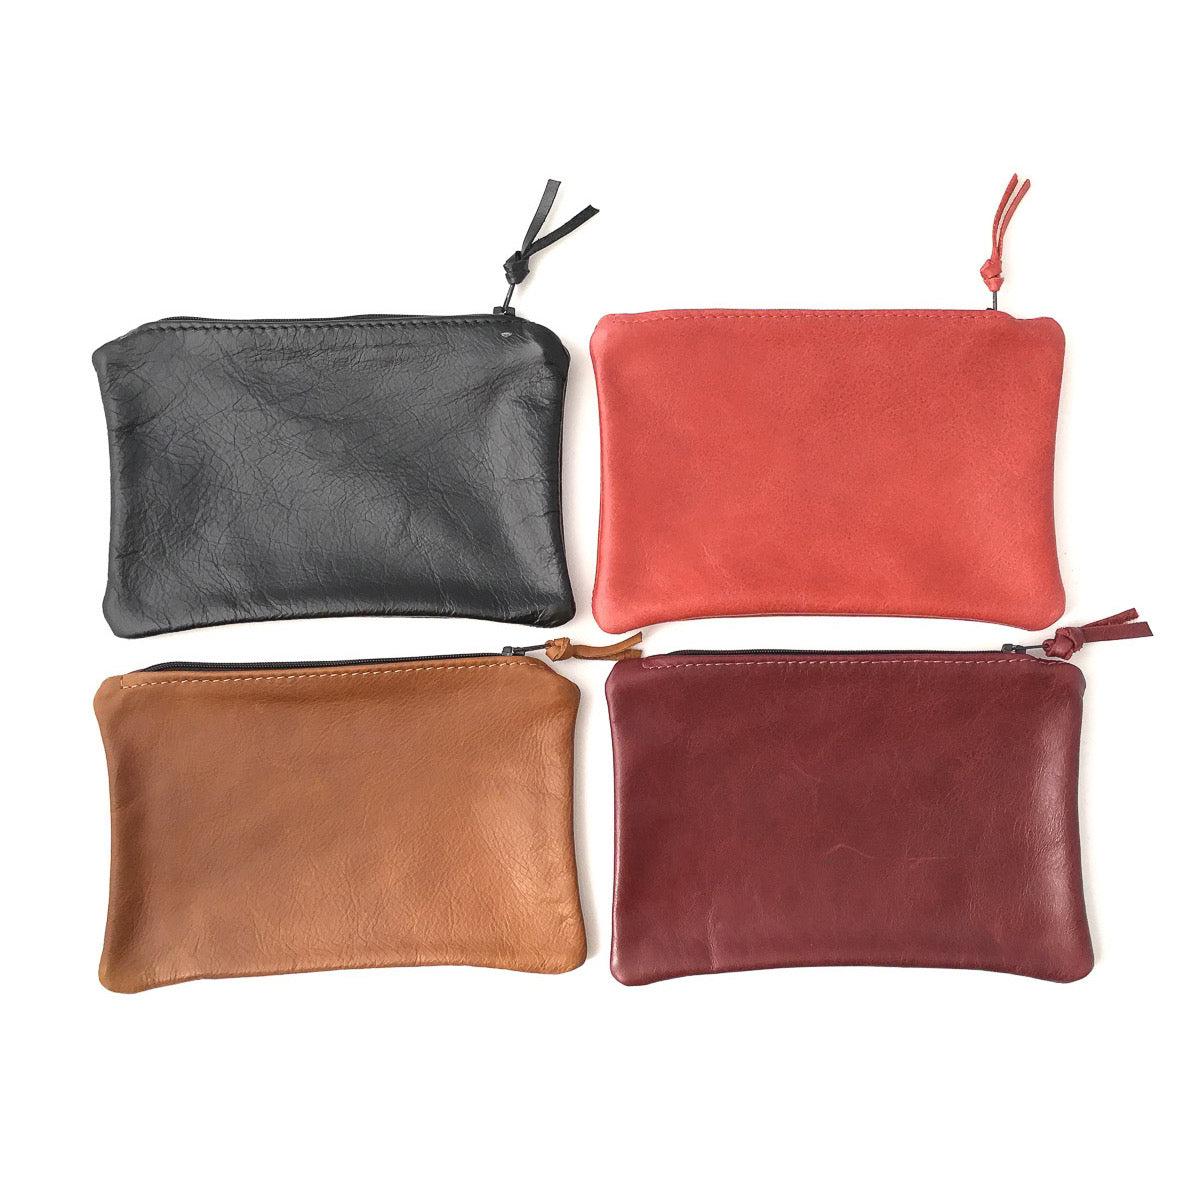 Leather Zip Purse - Oxblood Red